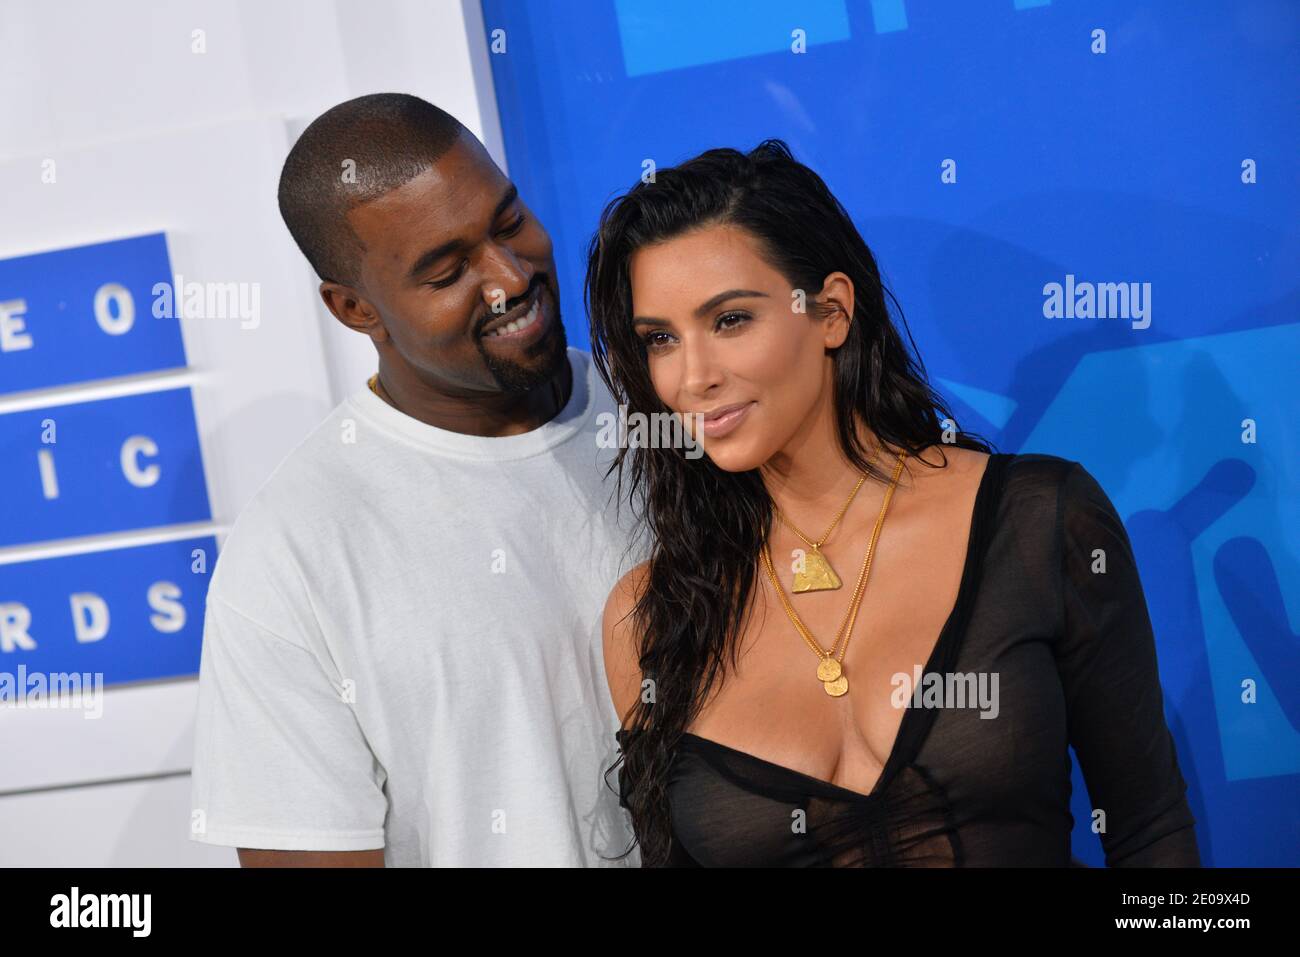 TV personality Kim Kardashian West and recording artist Kanye West arrive at the 2016 MTV Video Music Awards at Madison Square Garden on August 28, 20 Stock Photo